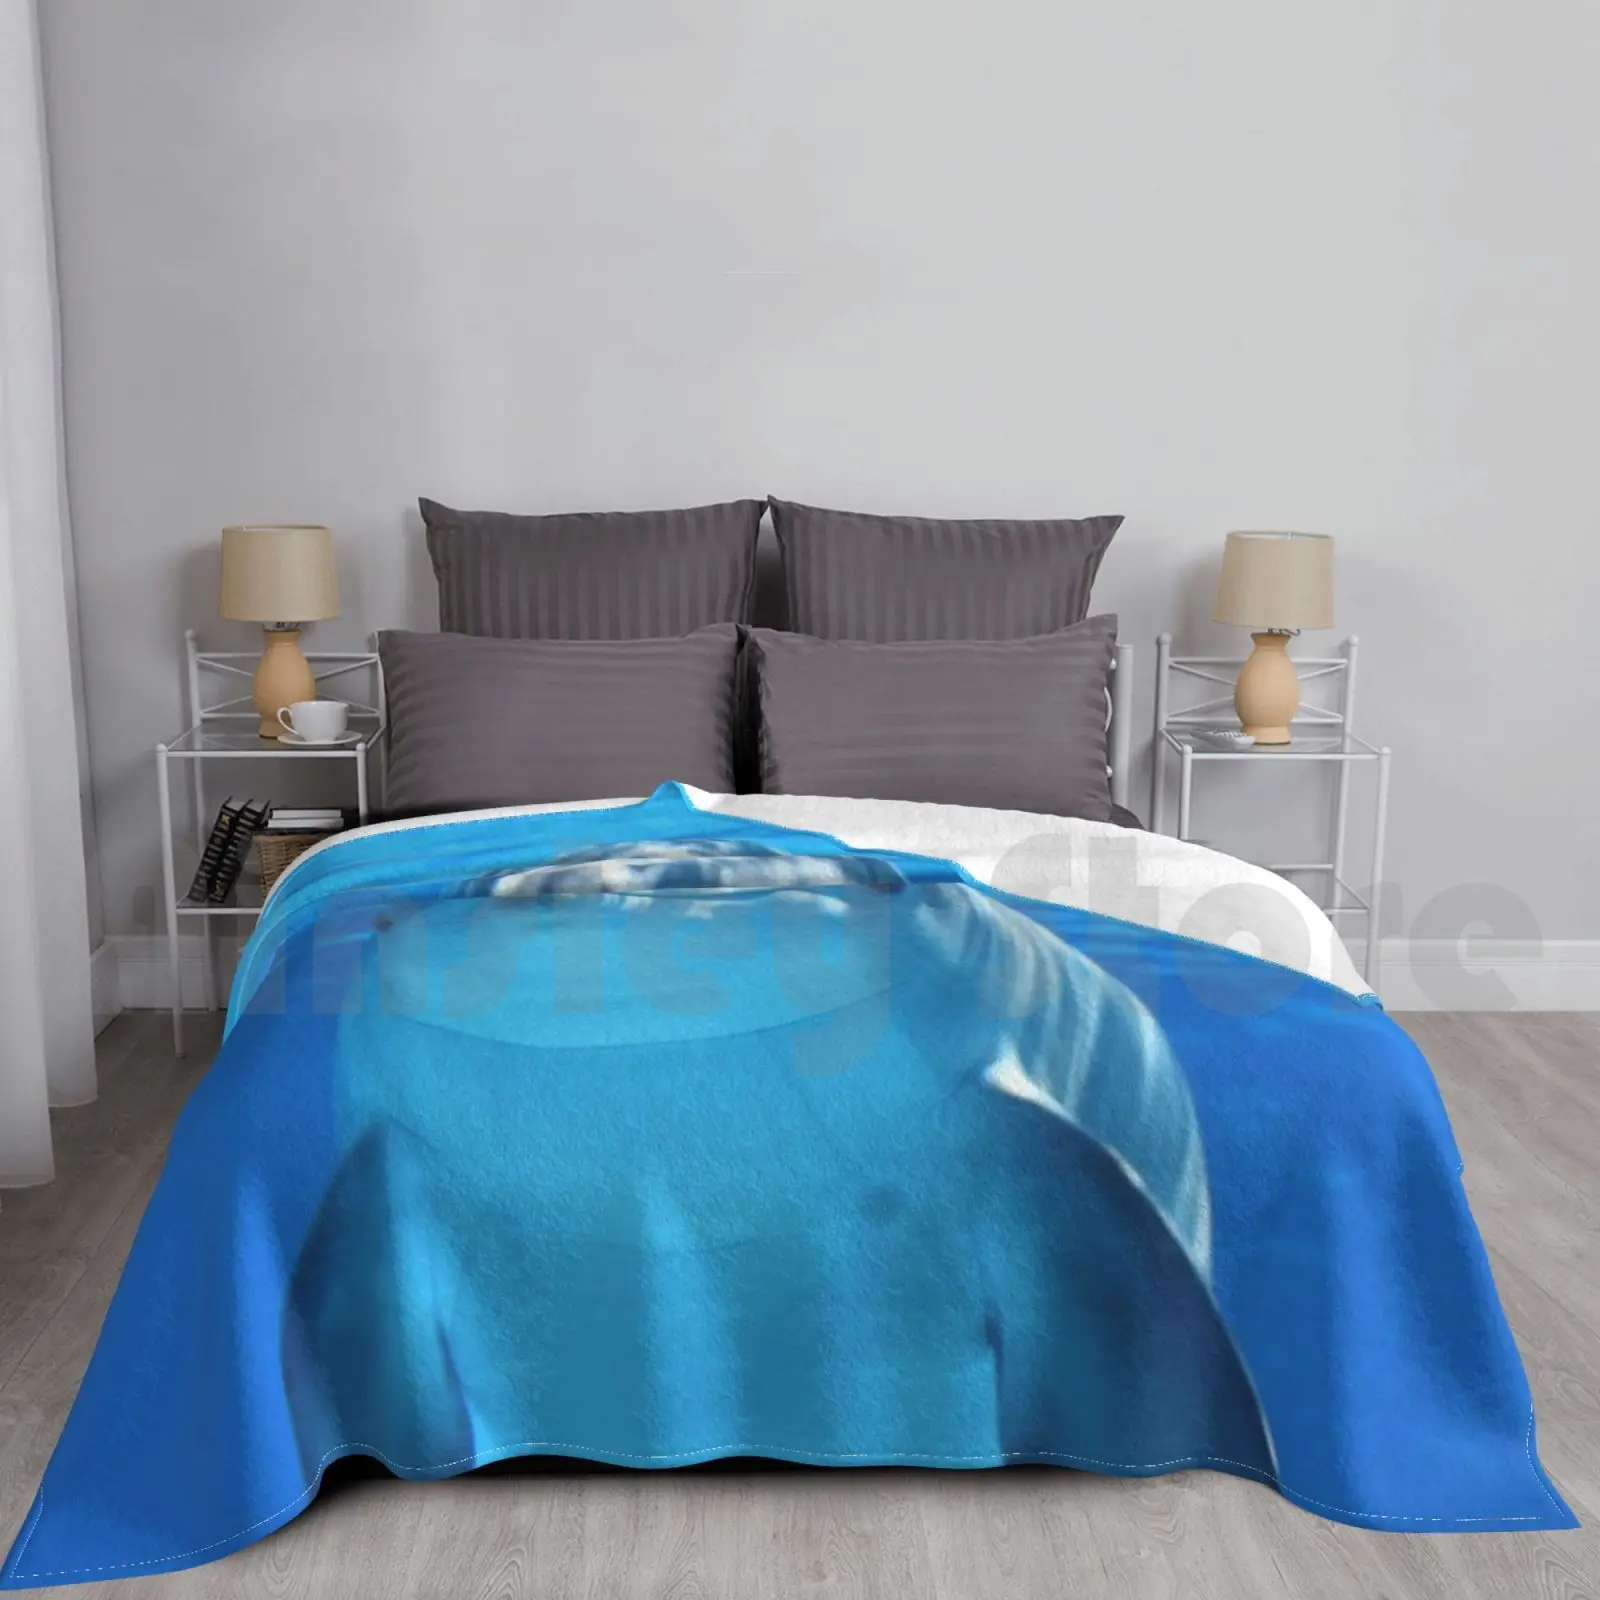 

Dolphin Swimming Blanket For Sofa Bed Travel Dolphin Dolphins Swimming Ocean Marine Marine Animals Dog Of The